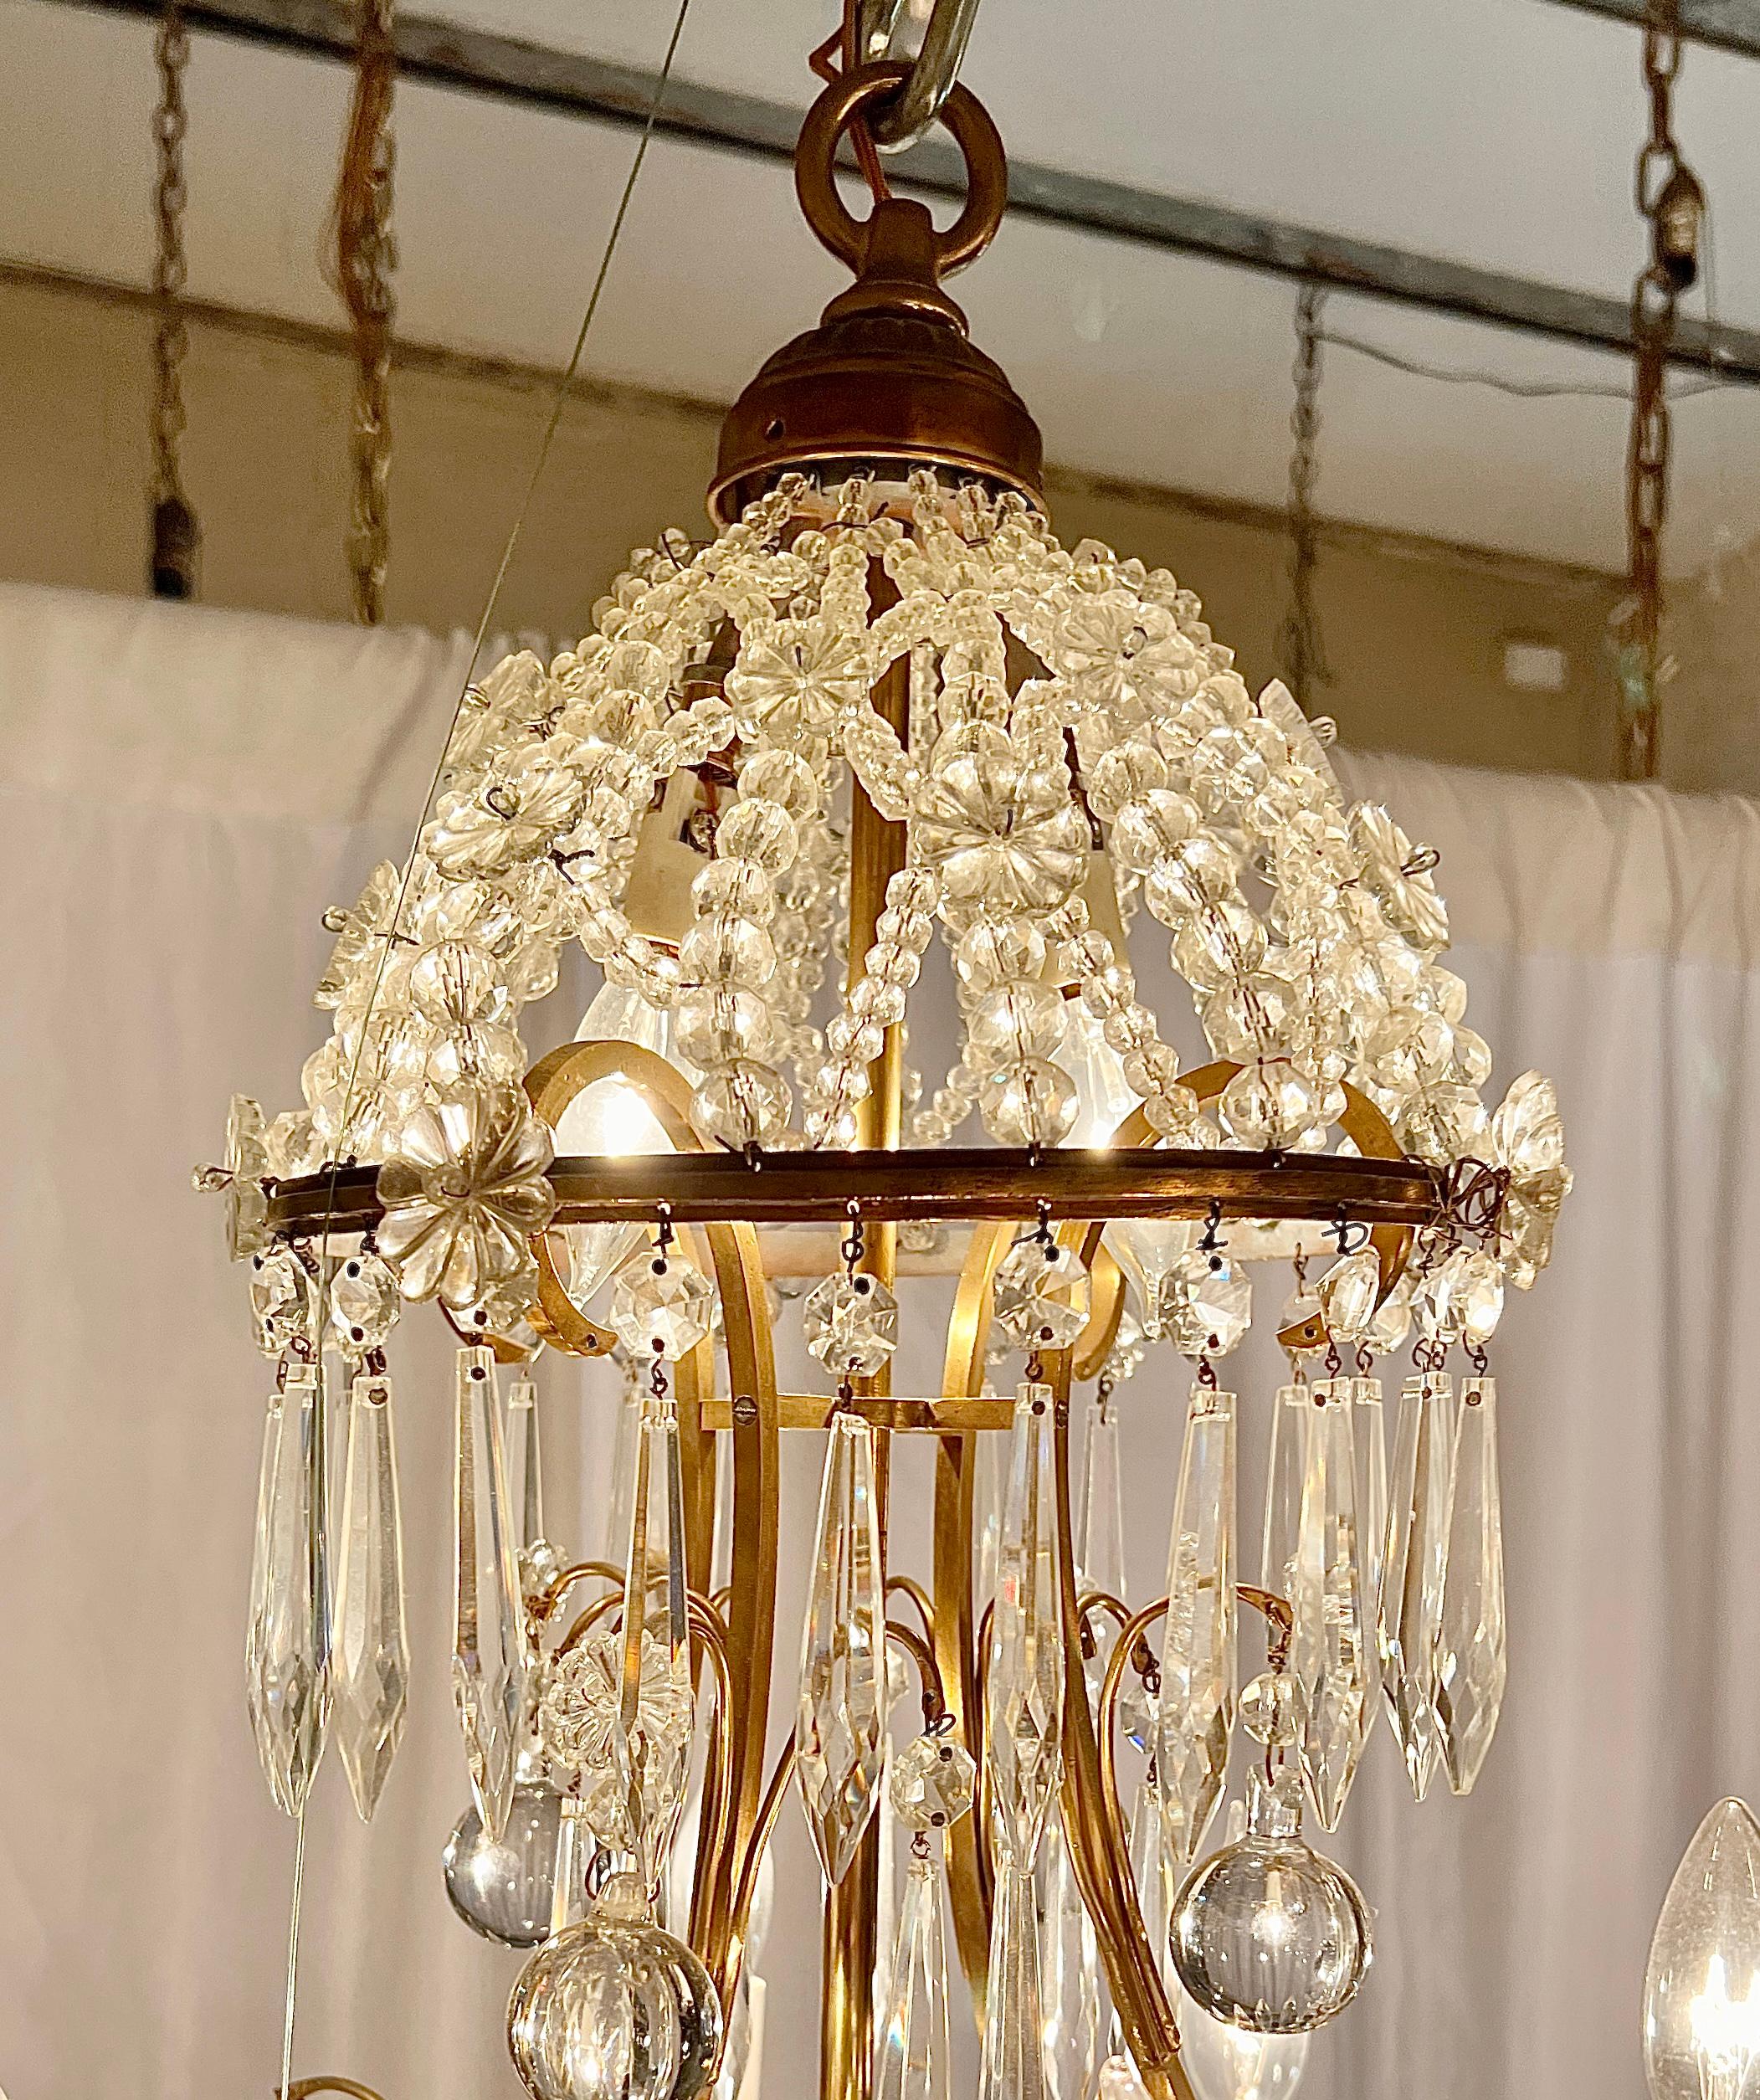 Antique French Gold Bronze and Baccarat Crystal Chandelier, Circa 1900's.